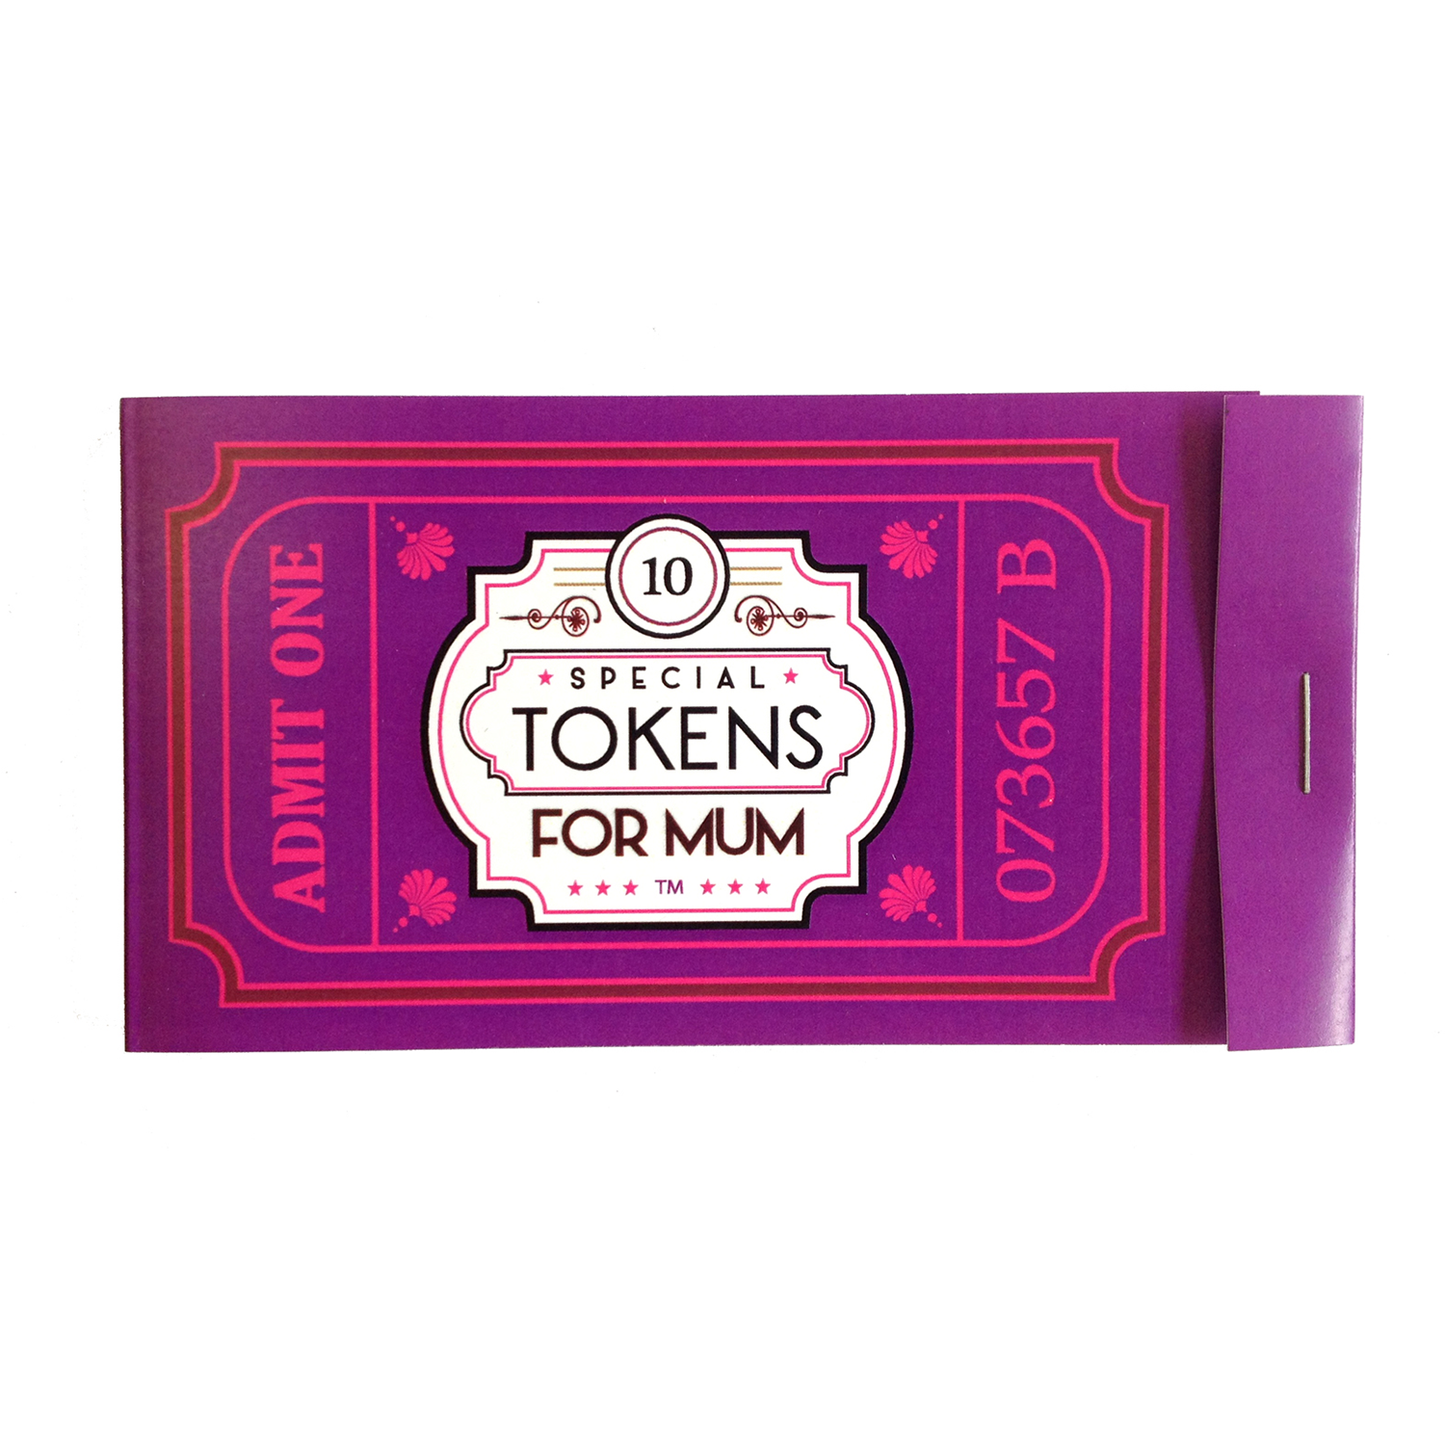 10 SPECIAL TOKENS FOR MUM